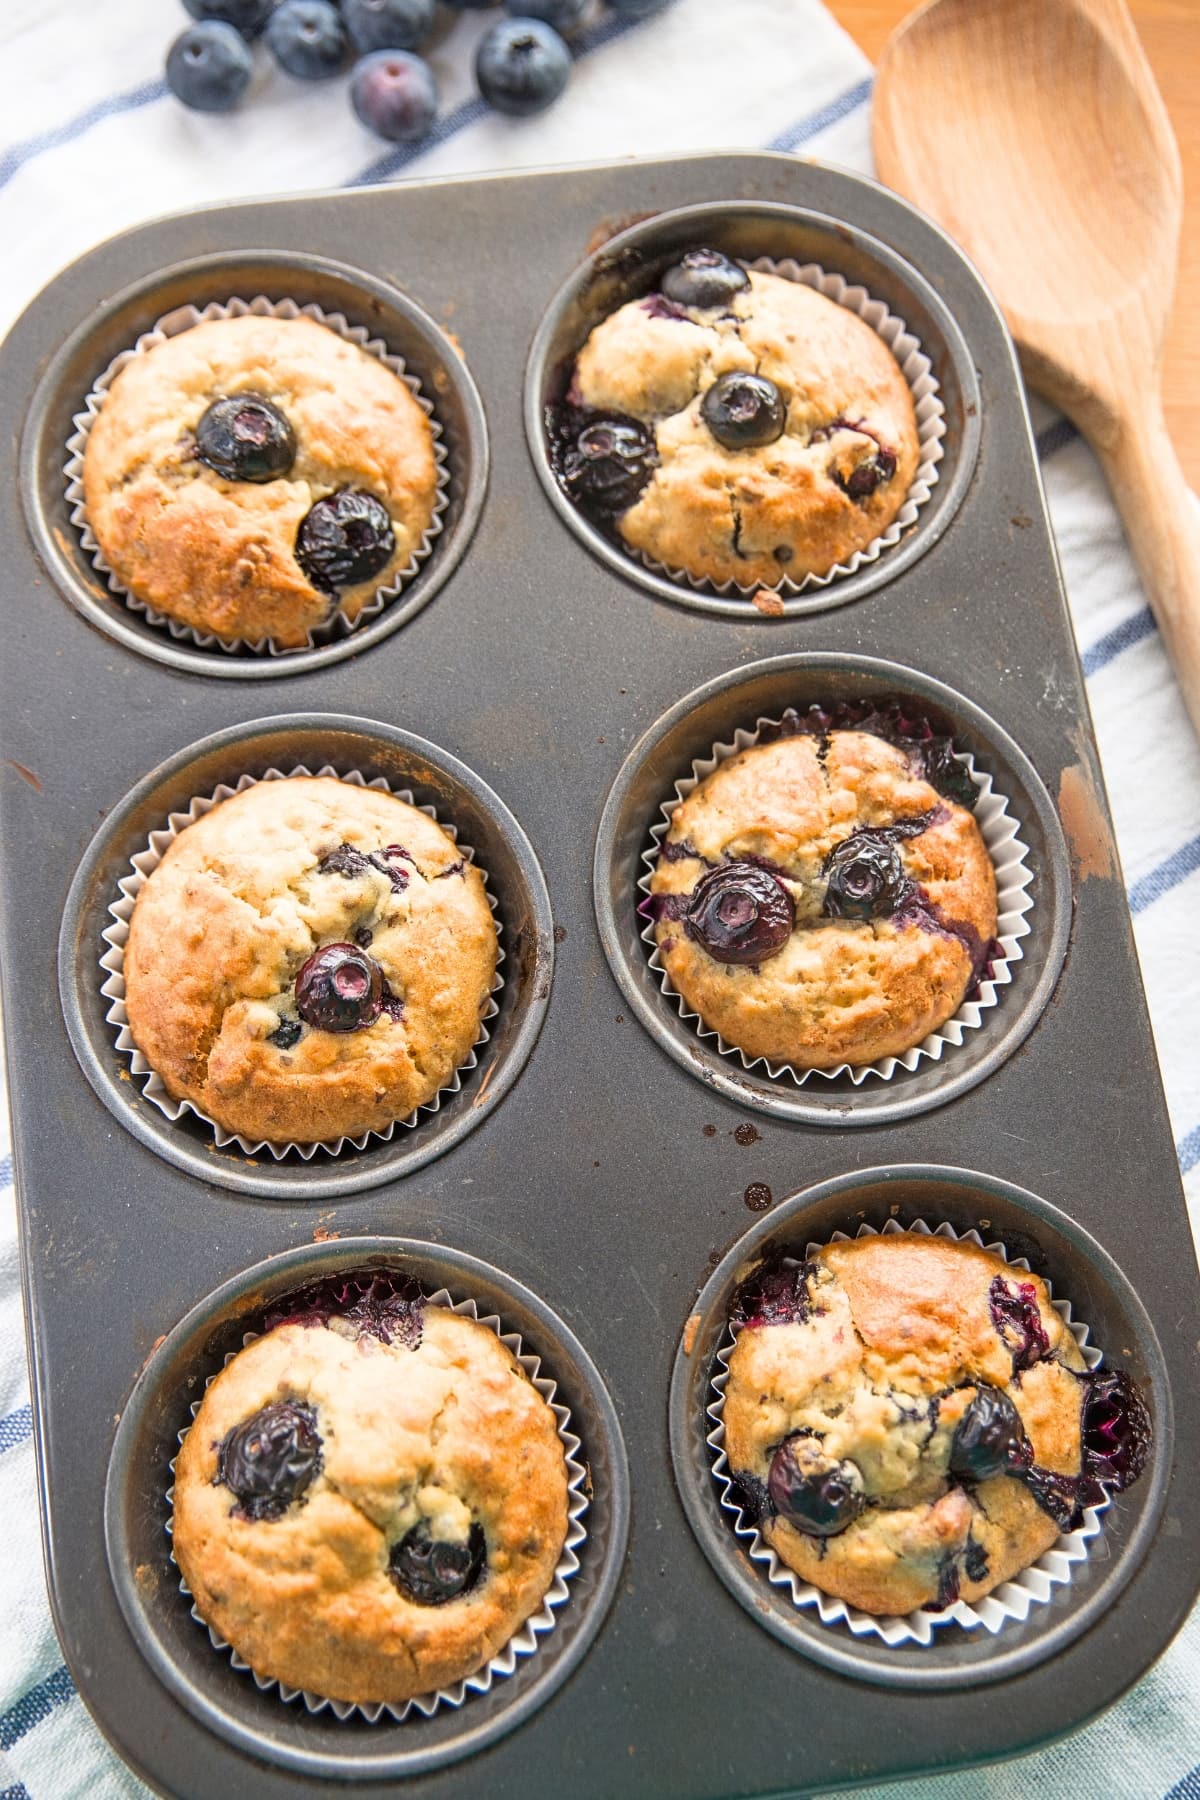 Jordan Marsh Blueberry Muffins in a Muffin Tin, Fresh Out of the Oven